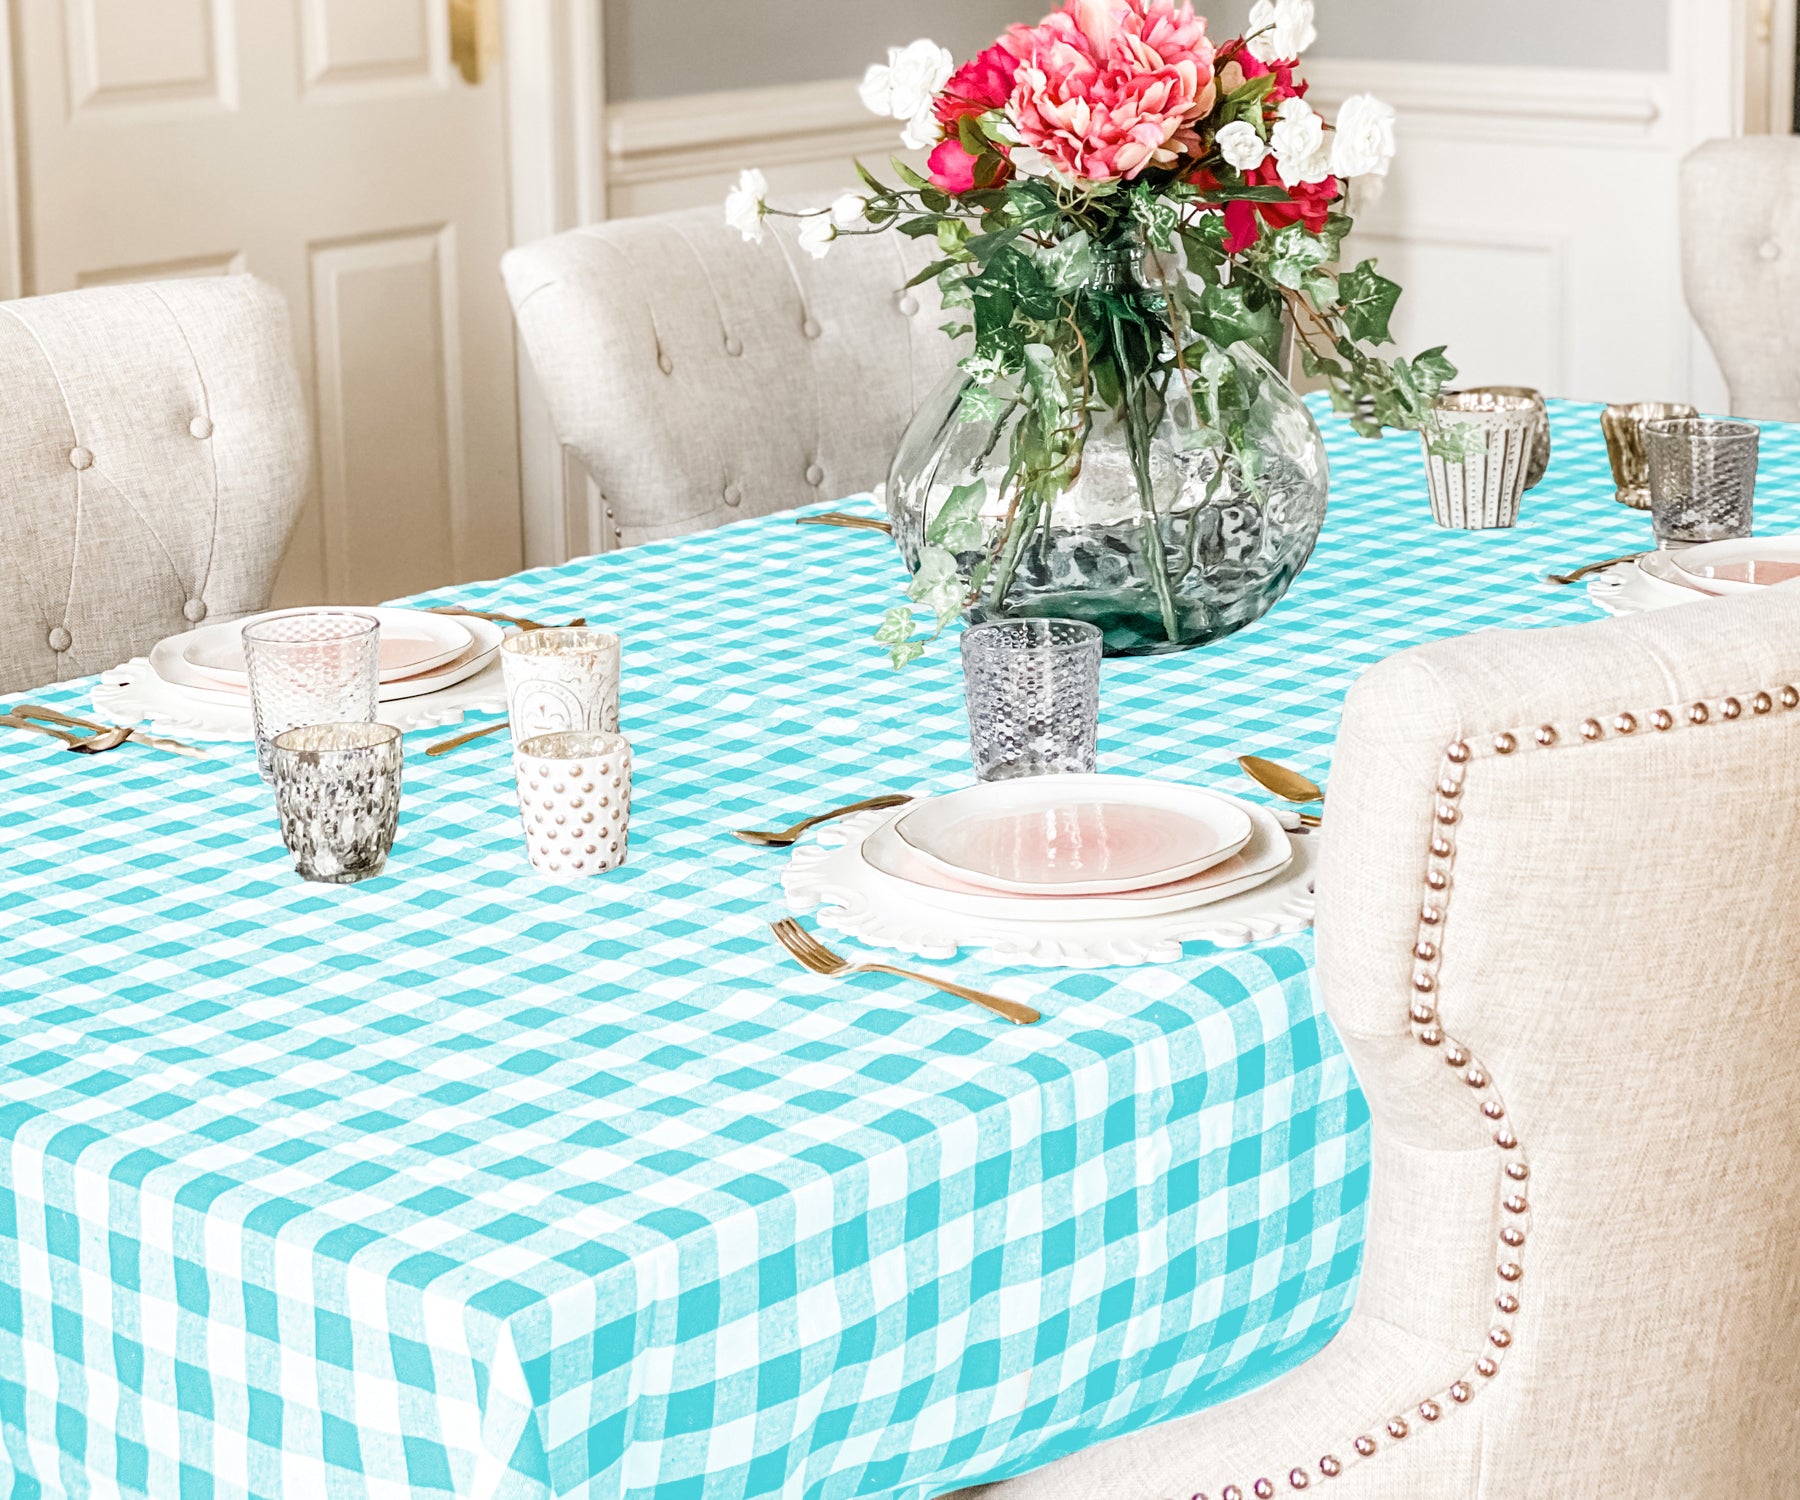 Elegant Blue Buffalo Checkered Tablecloth - Classic Charm for Your Table